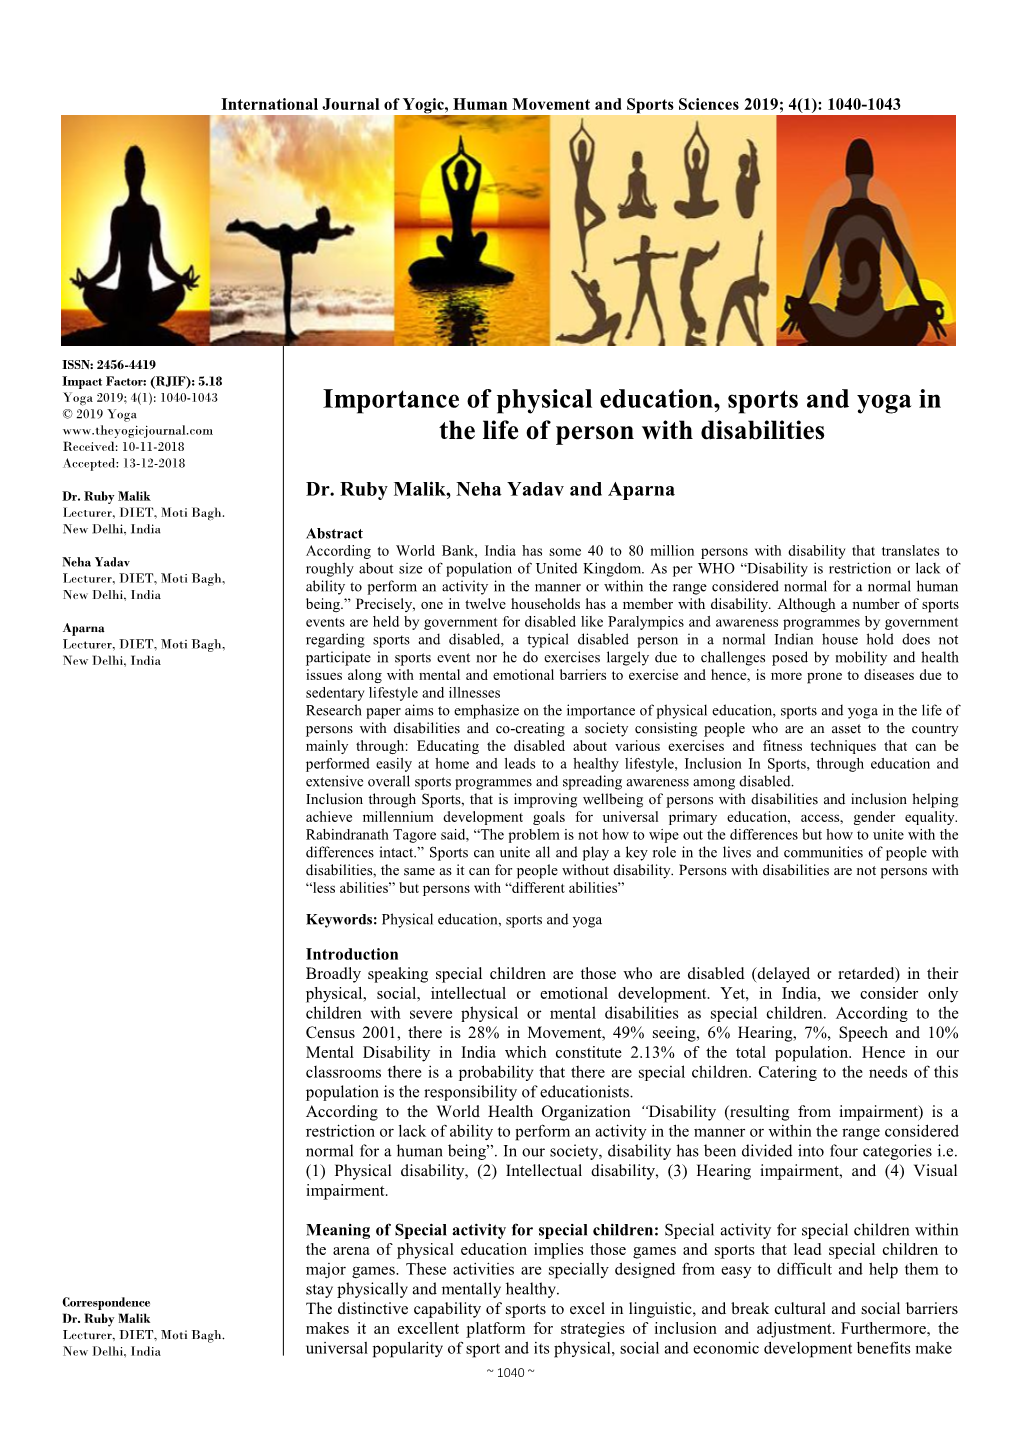 Importance of Physical Education, Sports and Yoga in the Life of Person